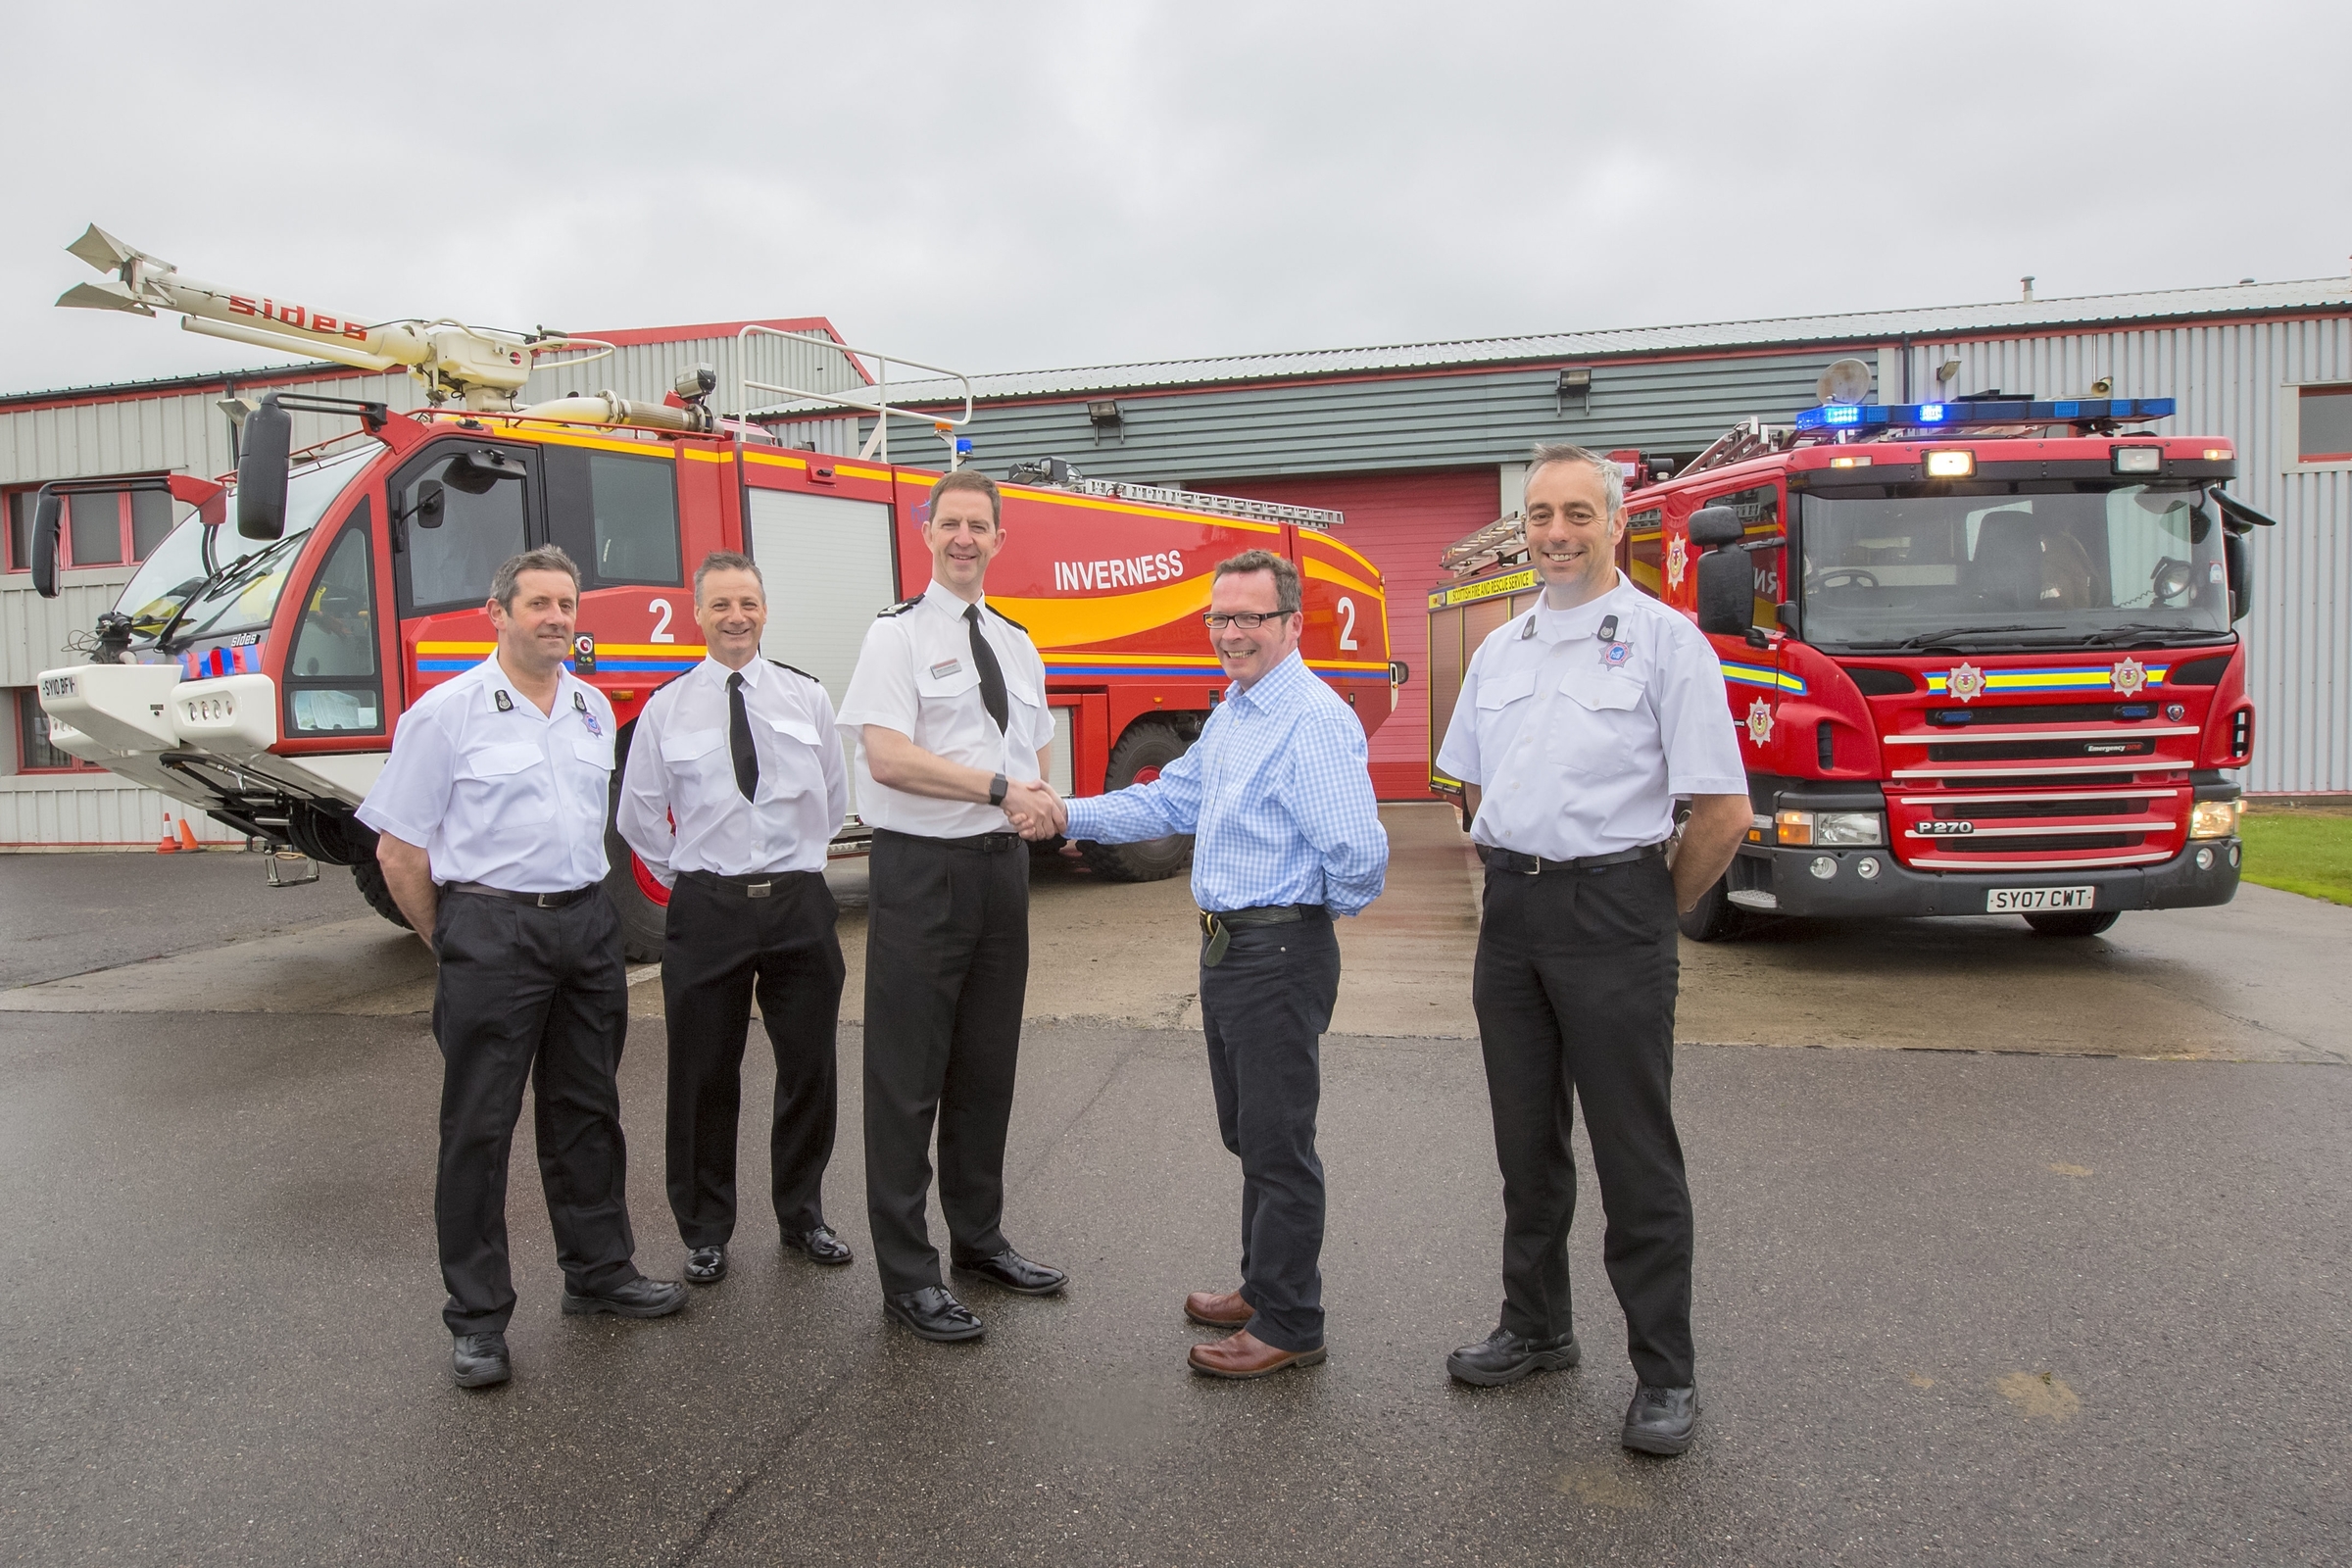 SFRS signs a Memorandum of Understanding with Highlands and Islands Airports Limited (HIAL), in an agreement to share personnel and resources in the event of an emergency.


Image by: Malcolm McCurrach
Wed, 15, June, 2016 |  © Malcolm McCurrach 2016 |  New Wave Images UK |  All rights Reserved. picturedesk@nwimages.co.uk | www.nwimages.co.uk | 07743 719366 

Event Photographer | Corporate Photographer | Editorial Photographer | Music Photographer